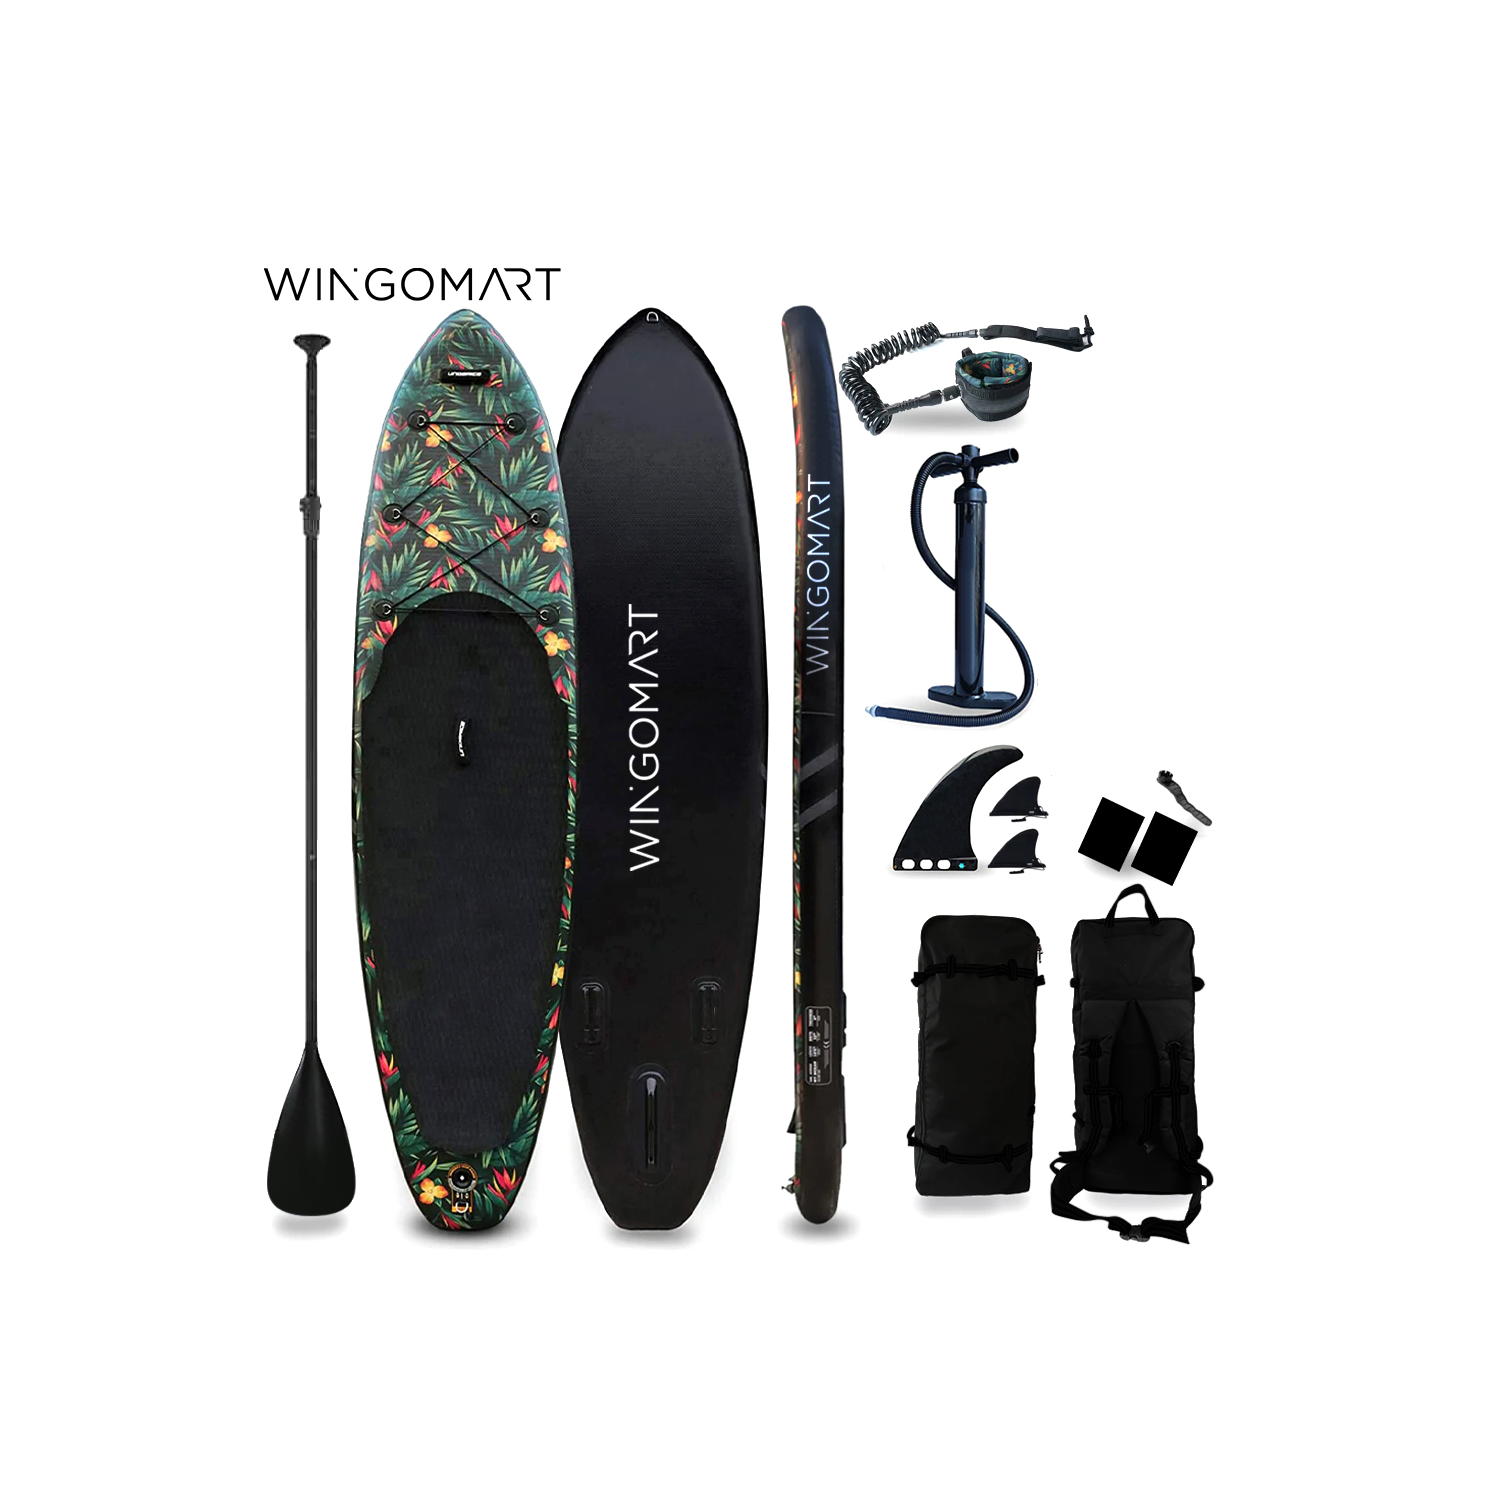 WINGOMART 10.7FT Inflatable Stand up Paddle Board W/ Premium